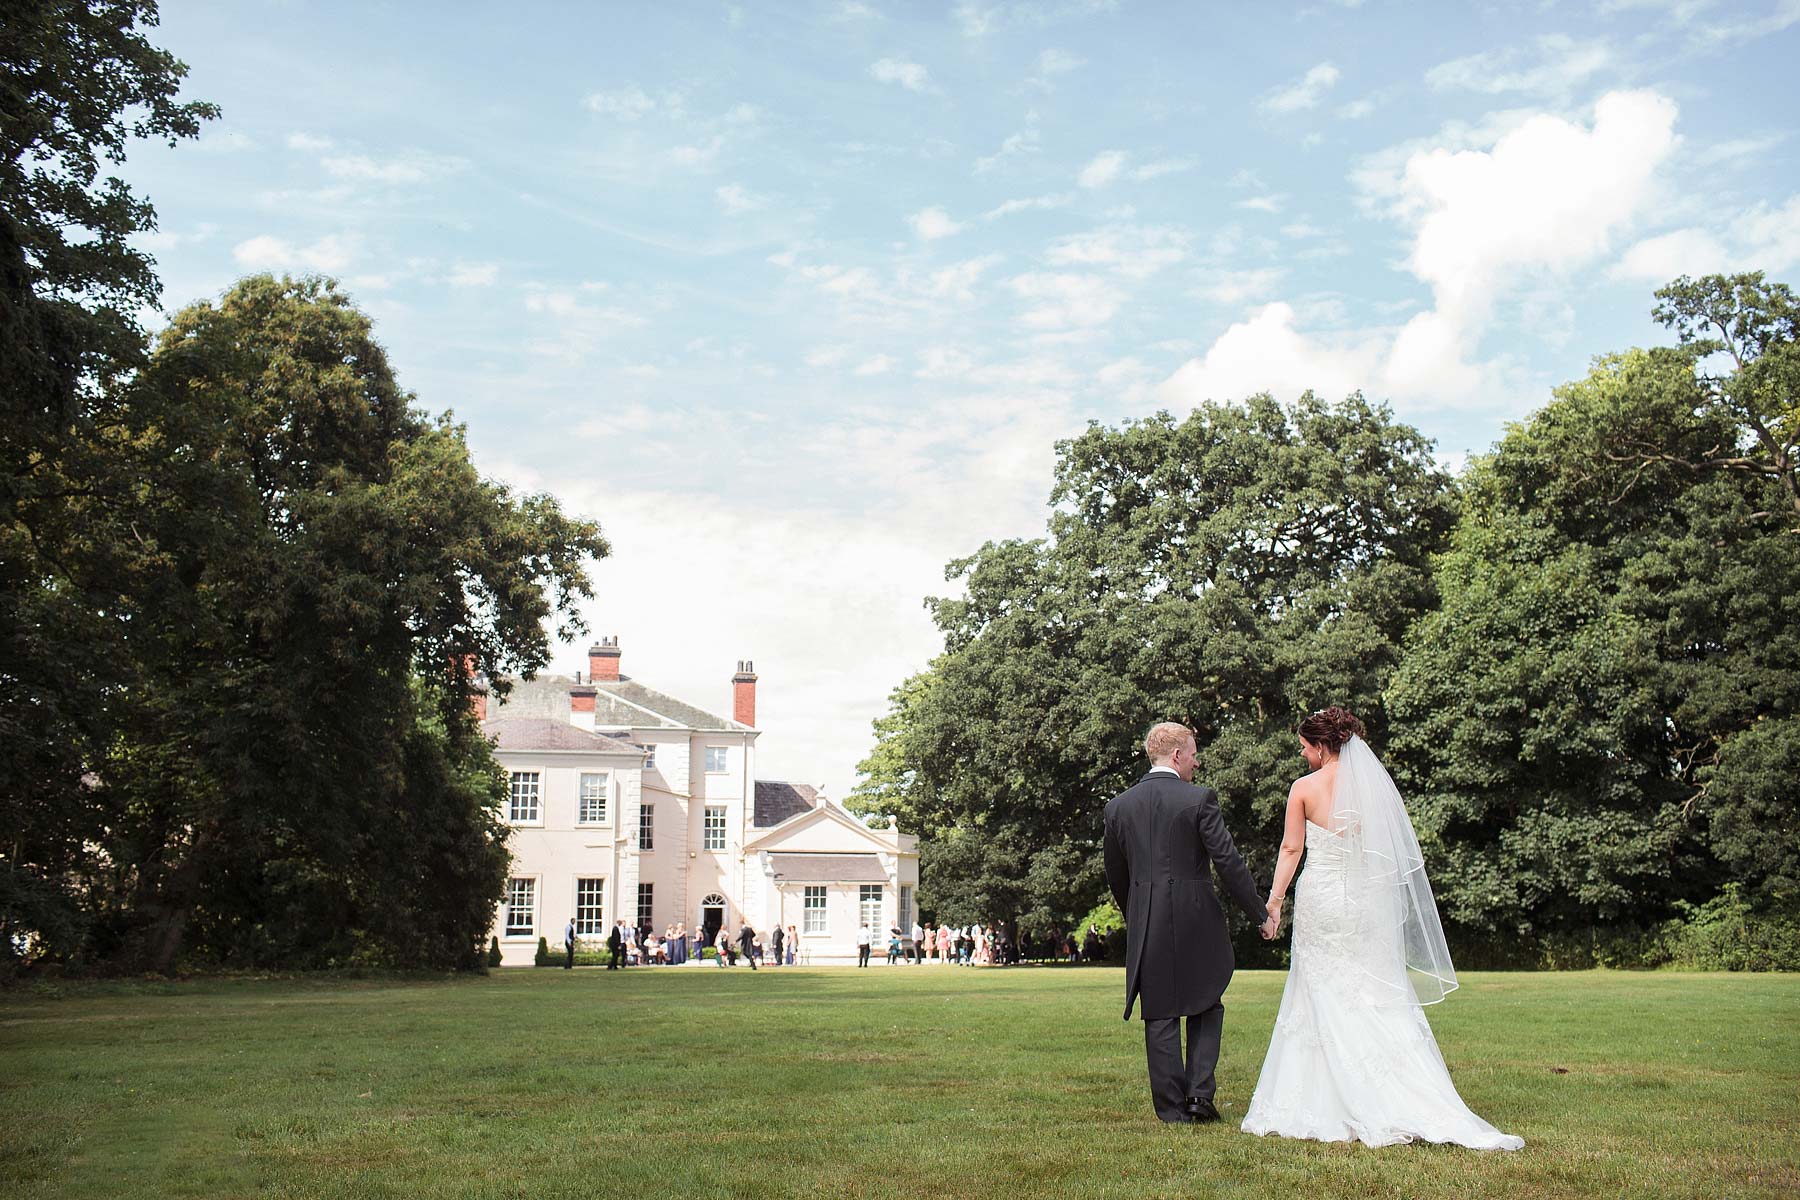 Stunning portraits of Bride and groom around gardens at Somerford Hall in Brewood by Somerford Hall Wedding Photographers Stuart James